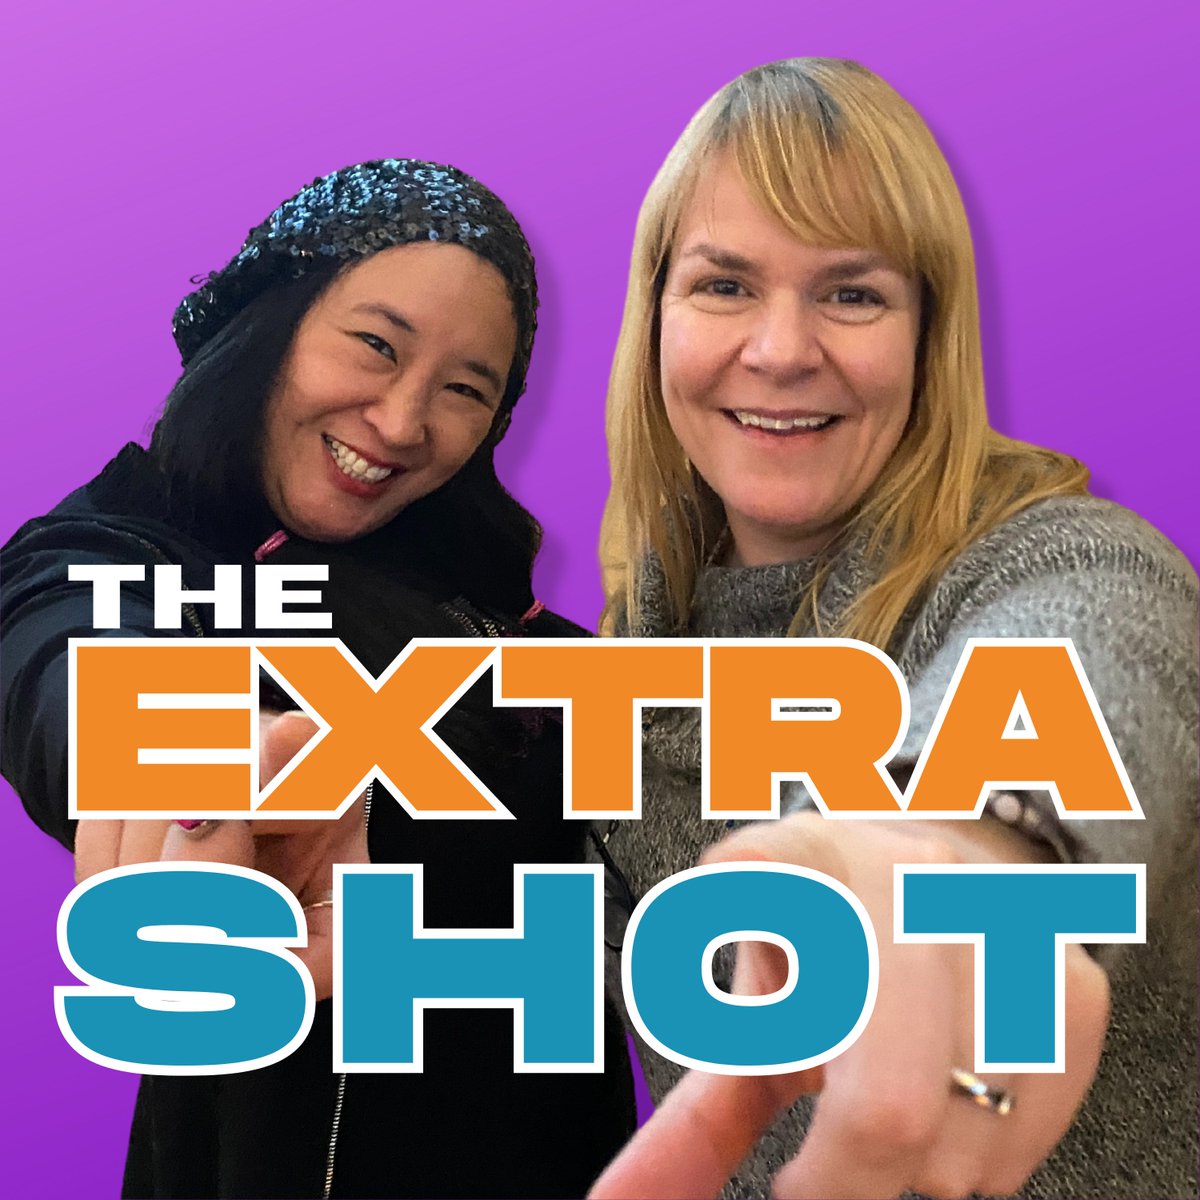 and at 10:30am today, @Spiderworking and I are hosting #TheExtraShot, our weekly podcast Join us on LinkedIn audio - deets below: linkedin.com/feed/update/ur…